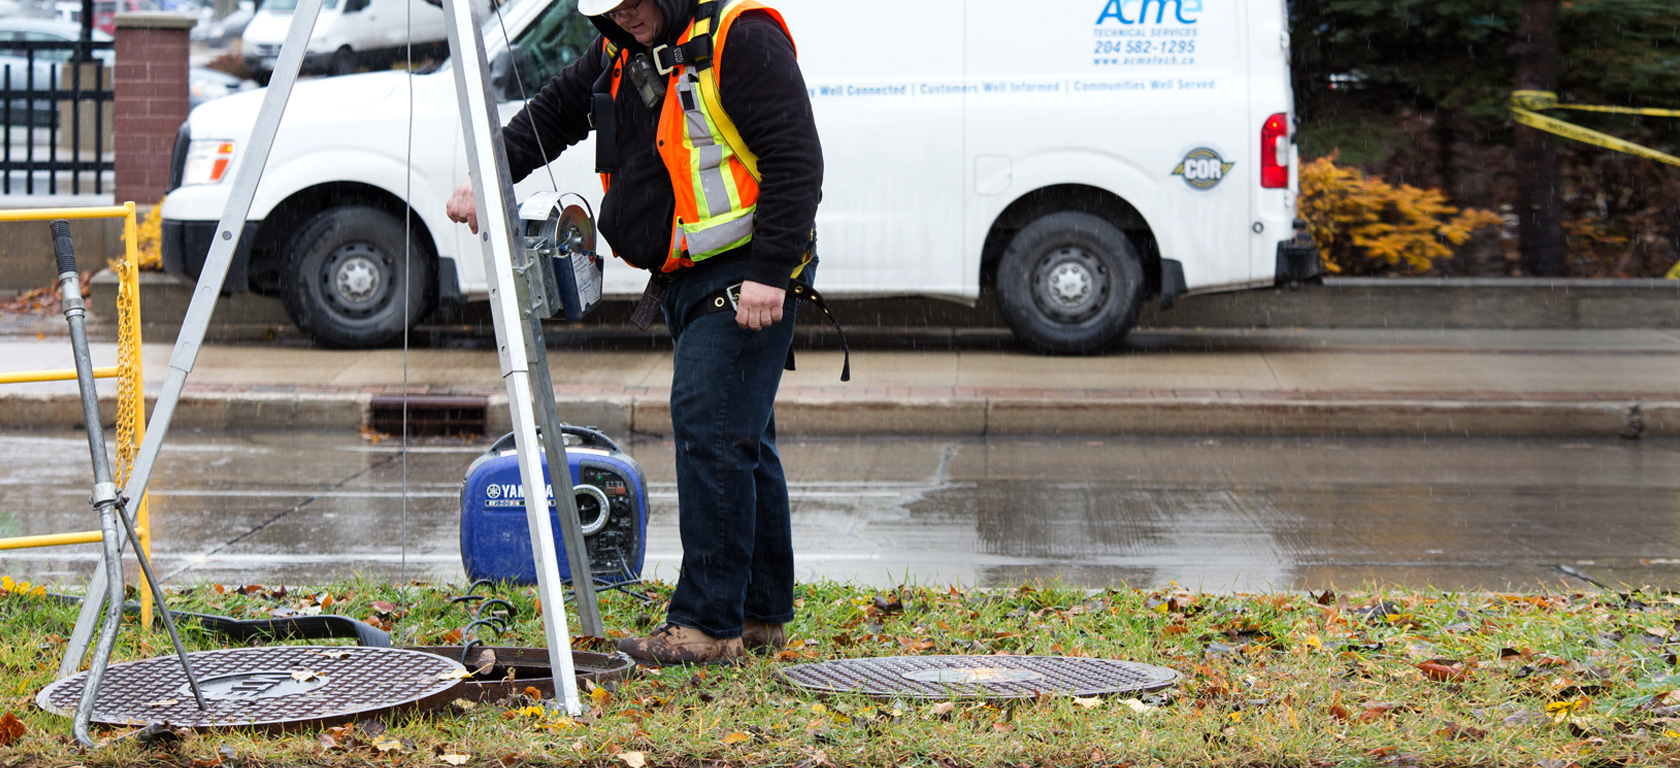 A man monitoring a coworker in a manhole.